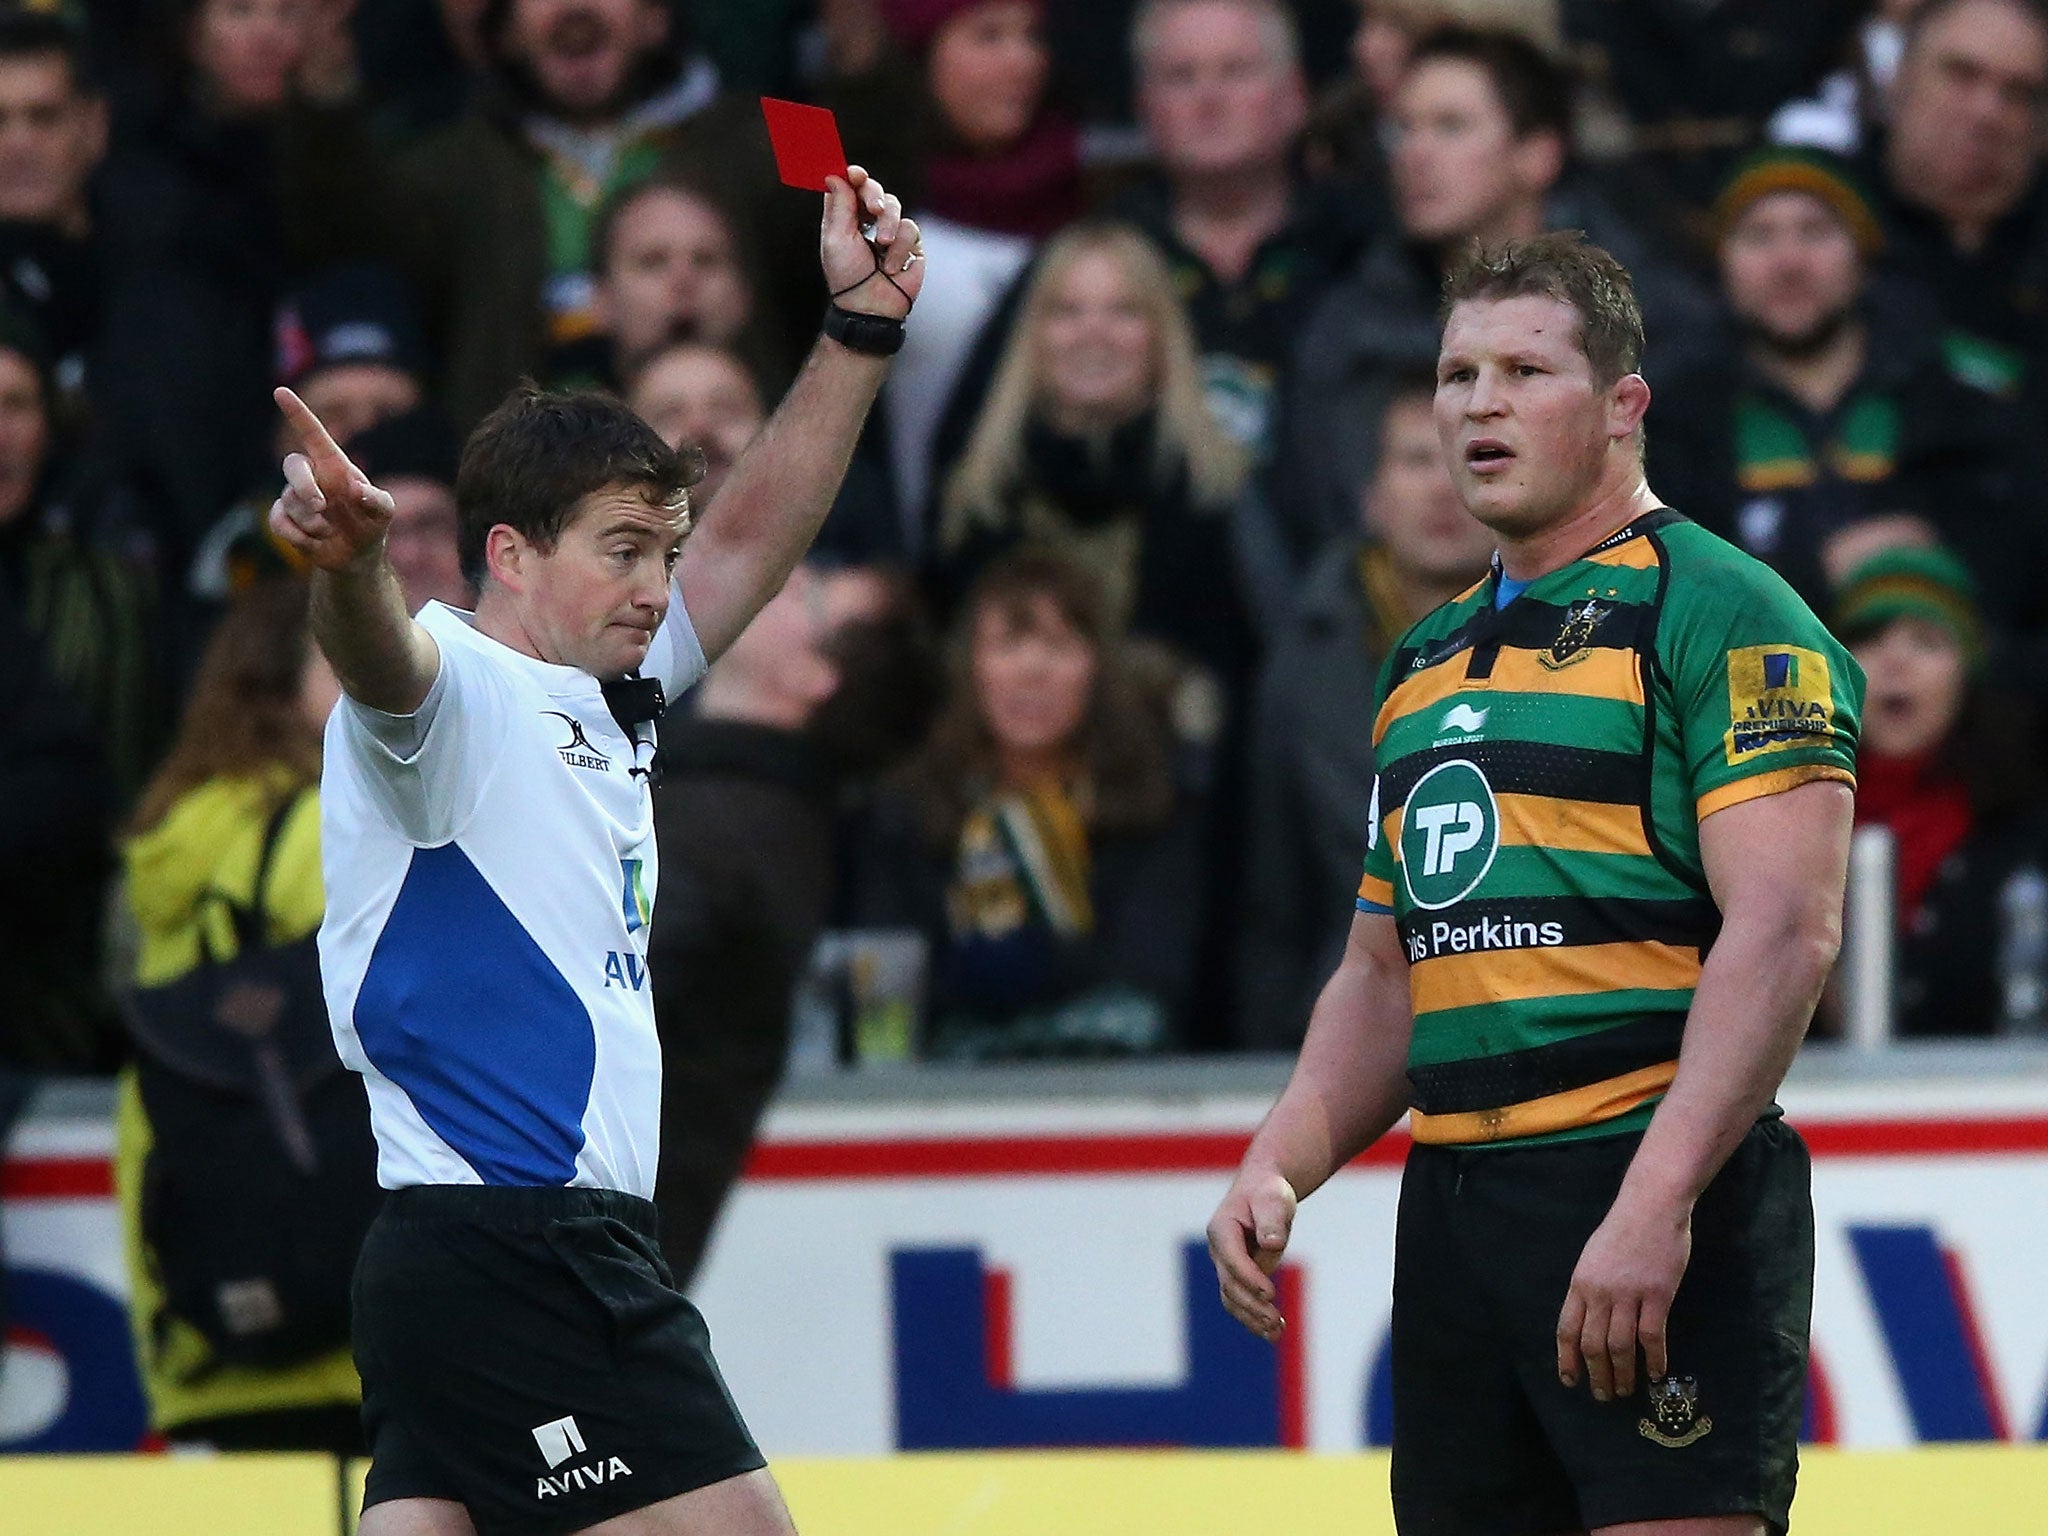 Northampton captain Dylan Hartley is shown the red card and sent off by referee JP Doyle during the Aviva Premiership match between Northampton Saints and Leicester on Saturday